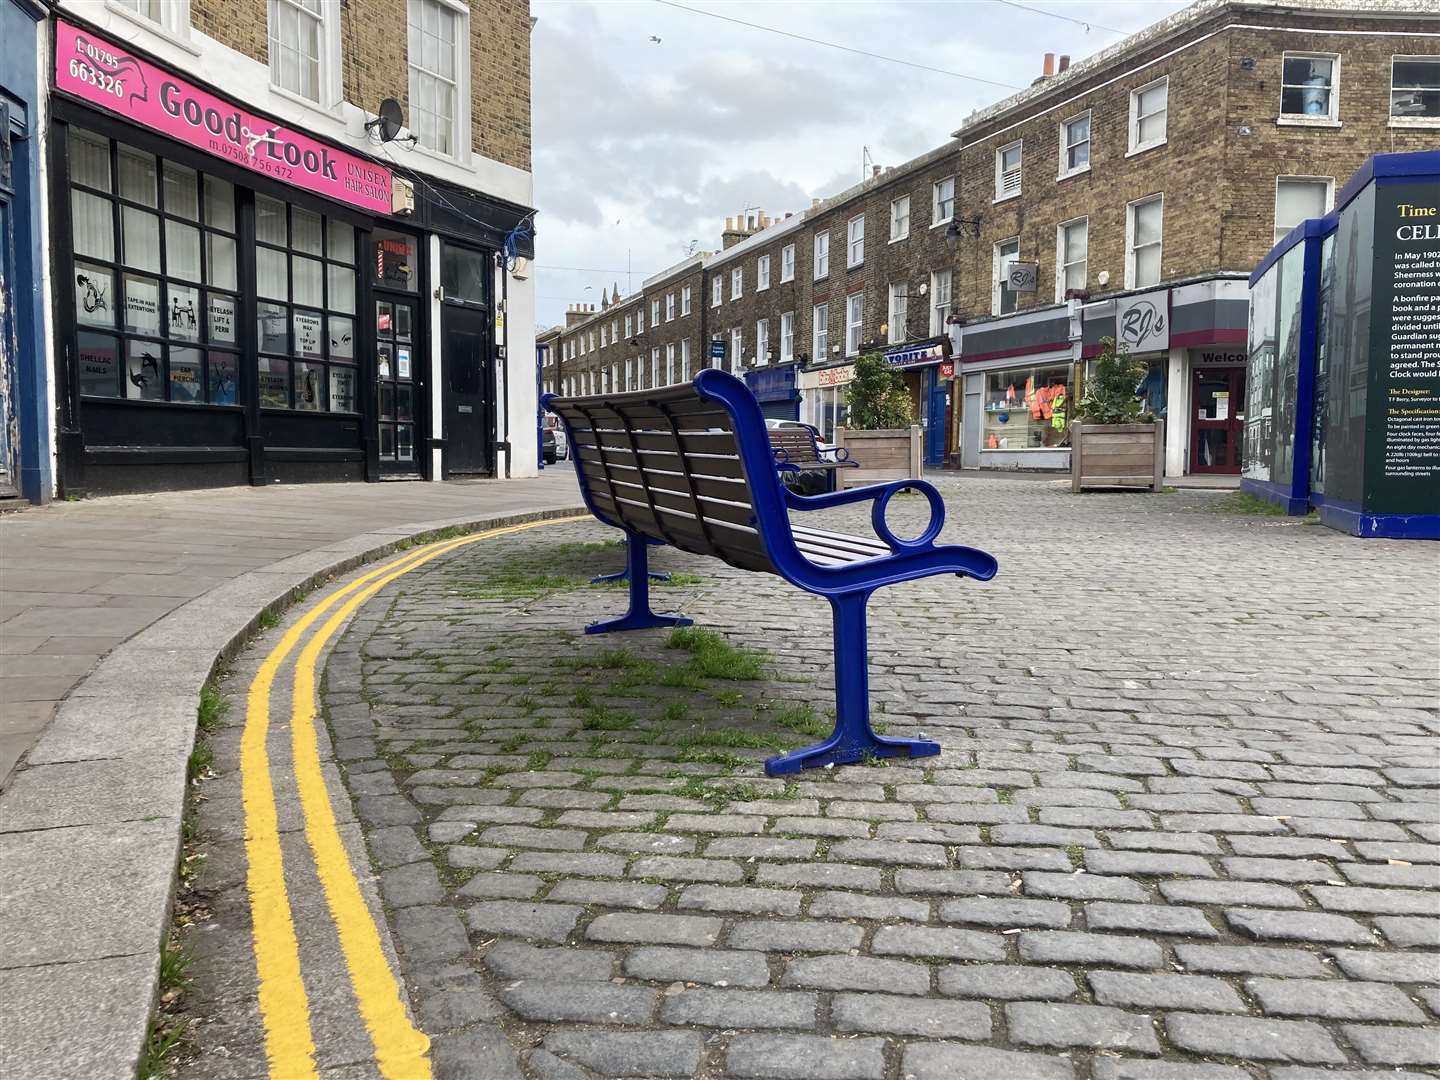 Double yellow lines painted around benches in the pedestrianised area of Sheerness